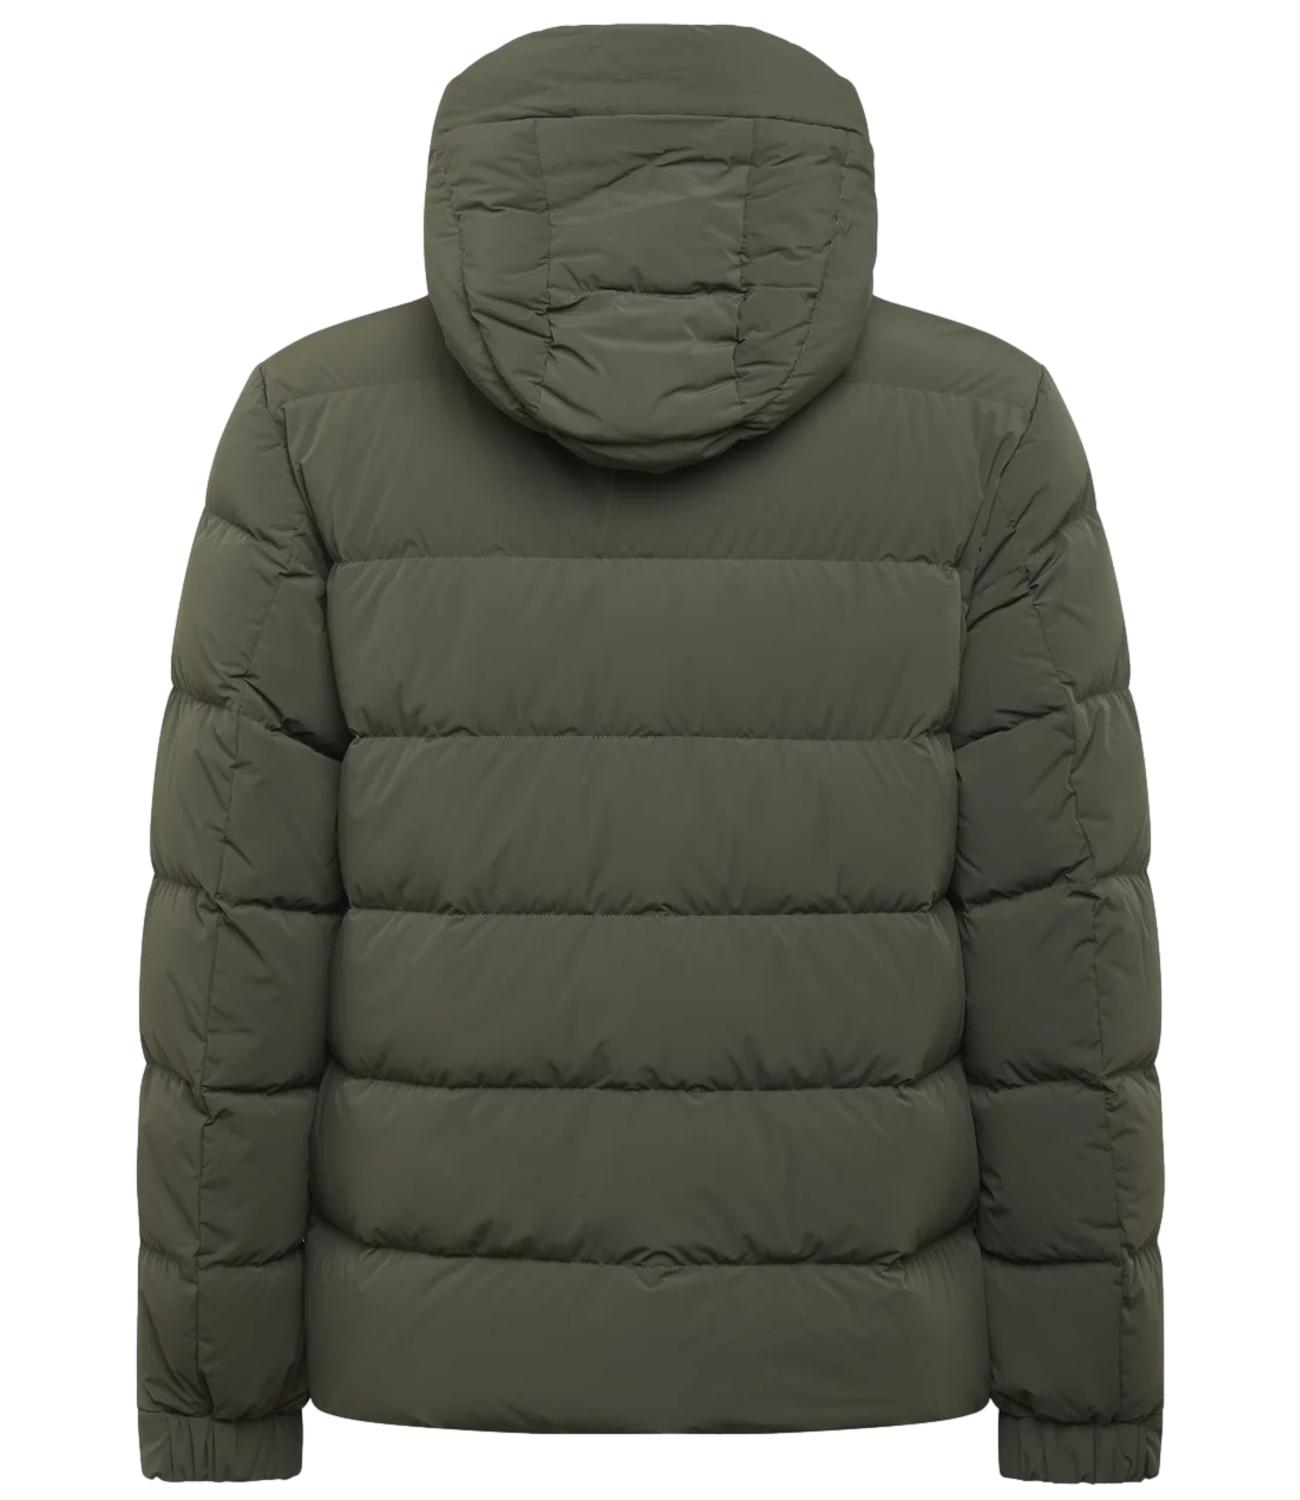 Baka down jacket in soft touch technical nylon with military green lakké effect nylon interior for men